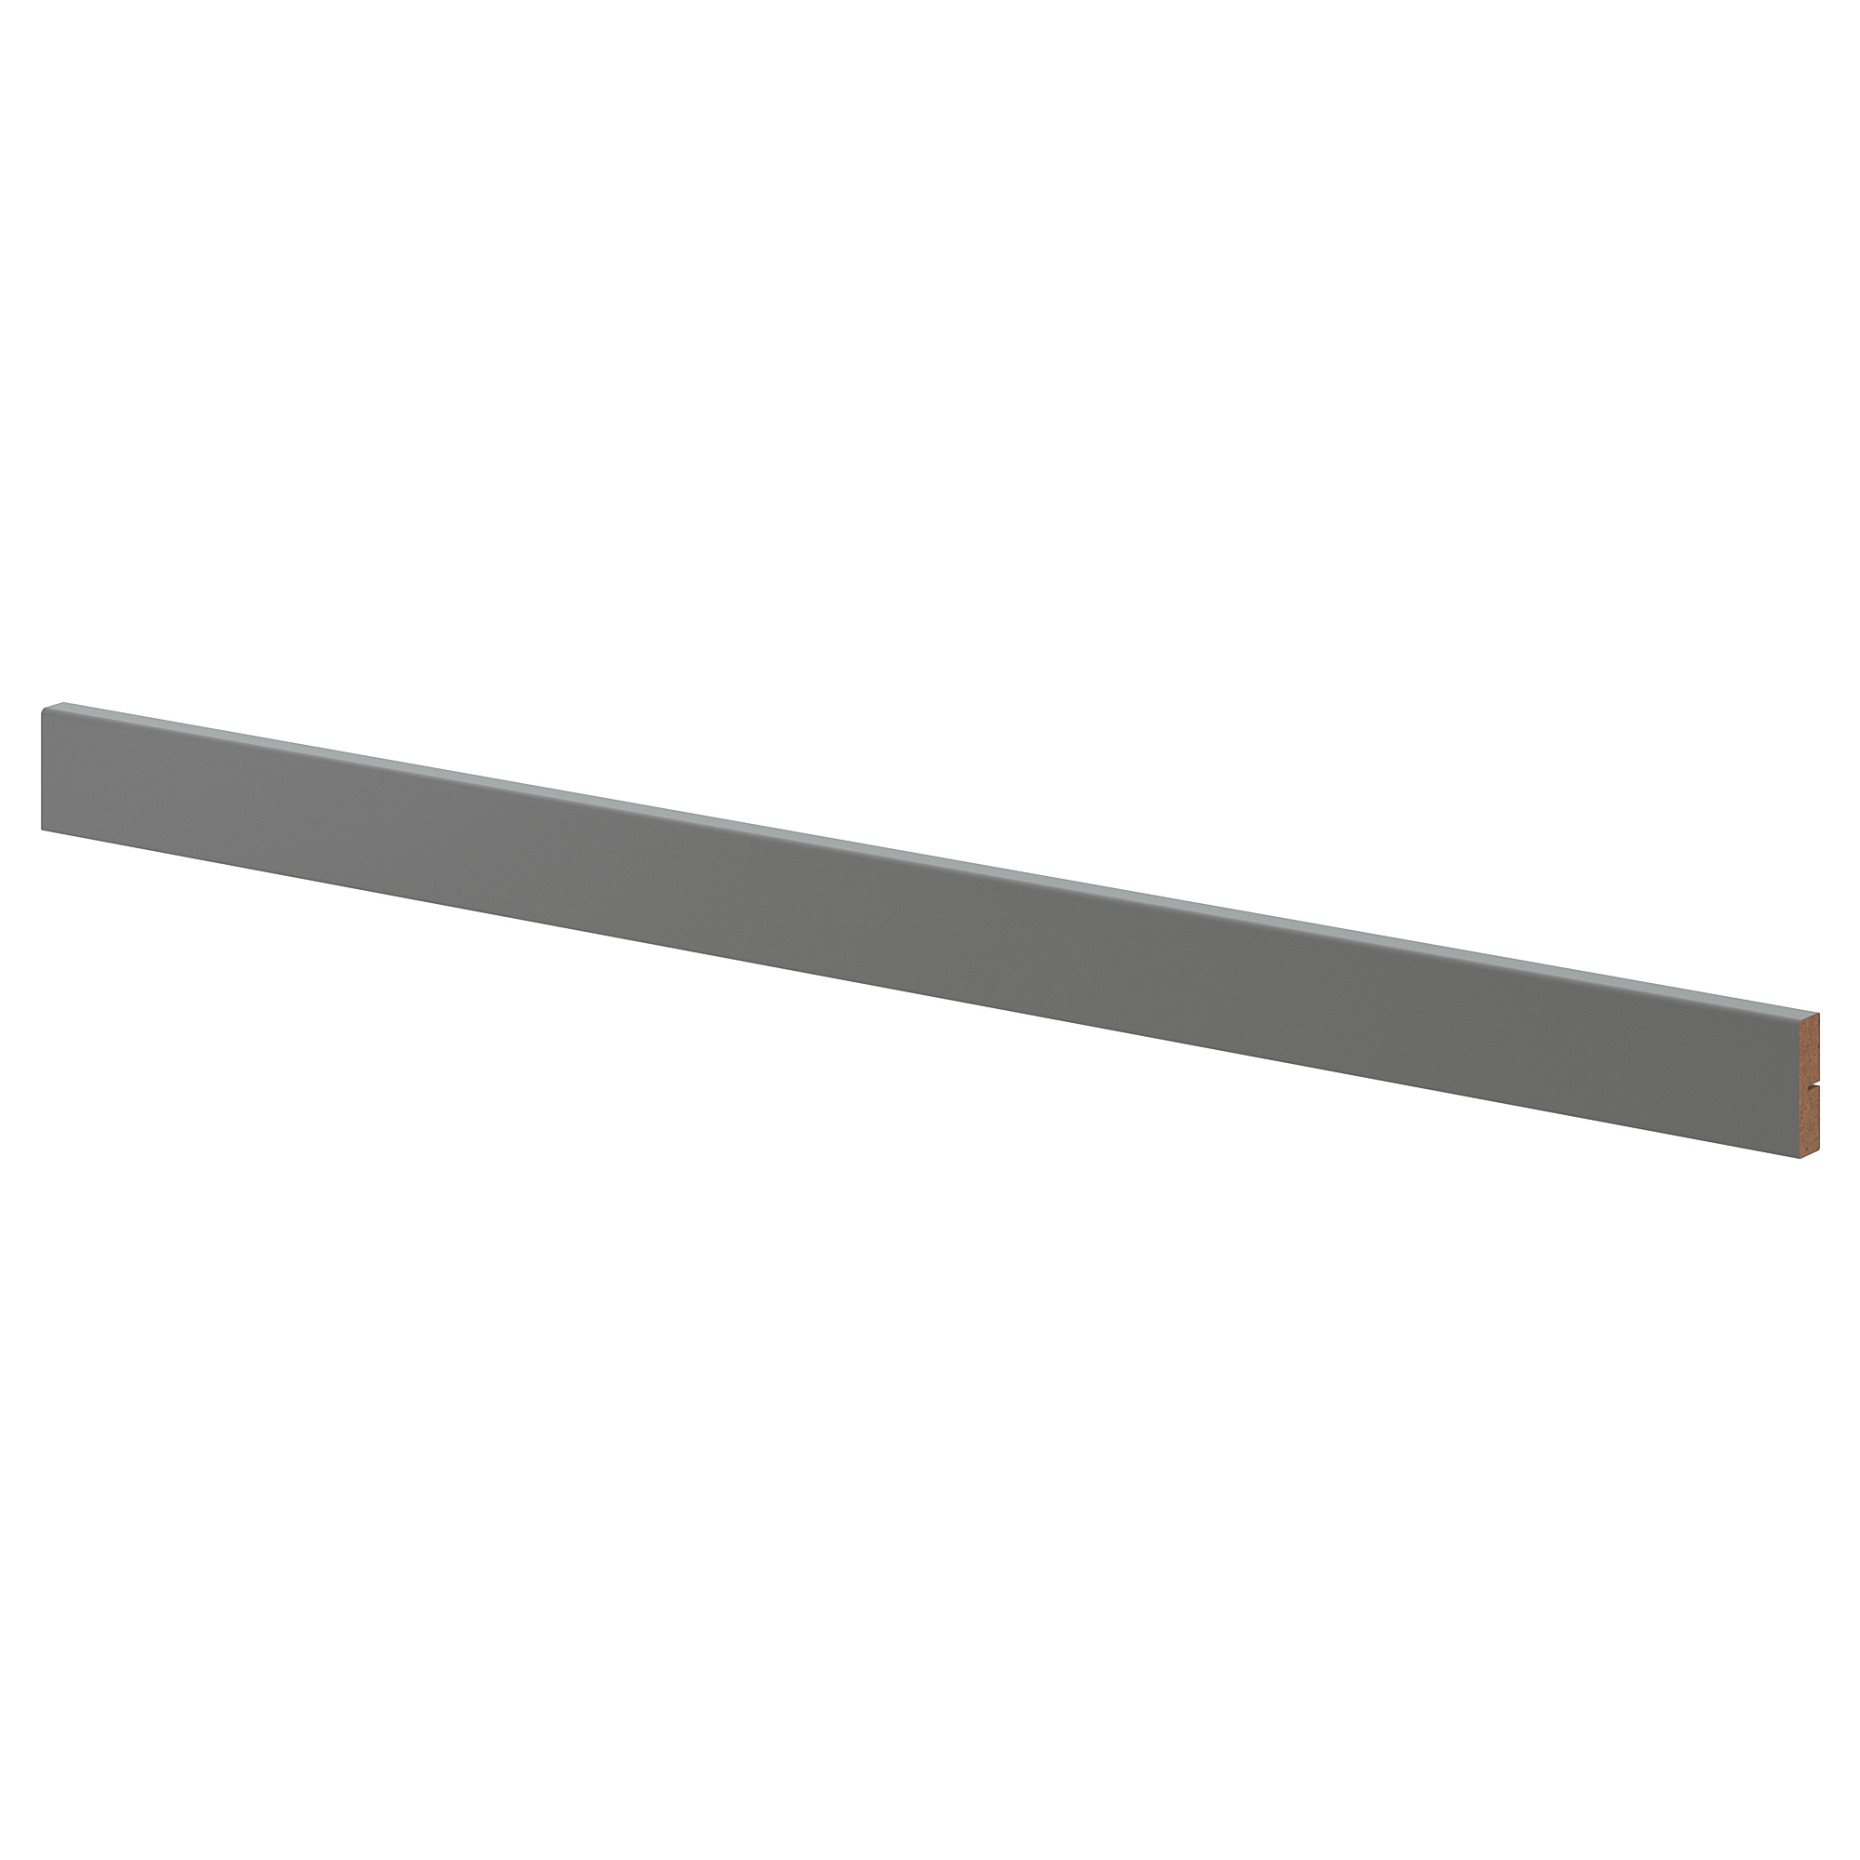 FORBATTRA, rounded deco strip/moulding, 504.540.84